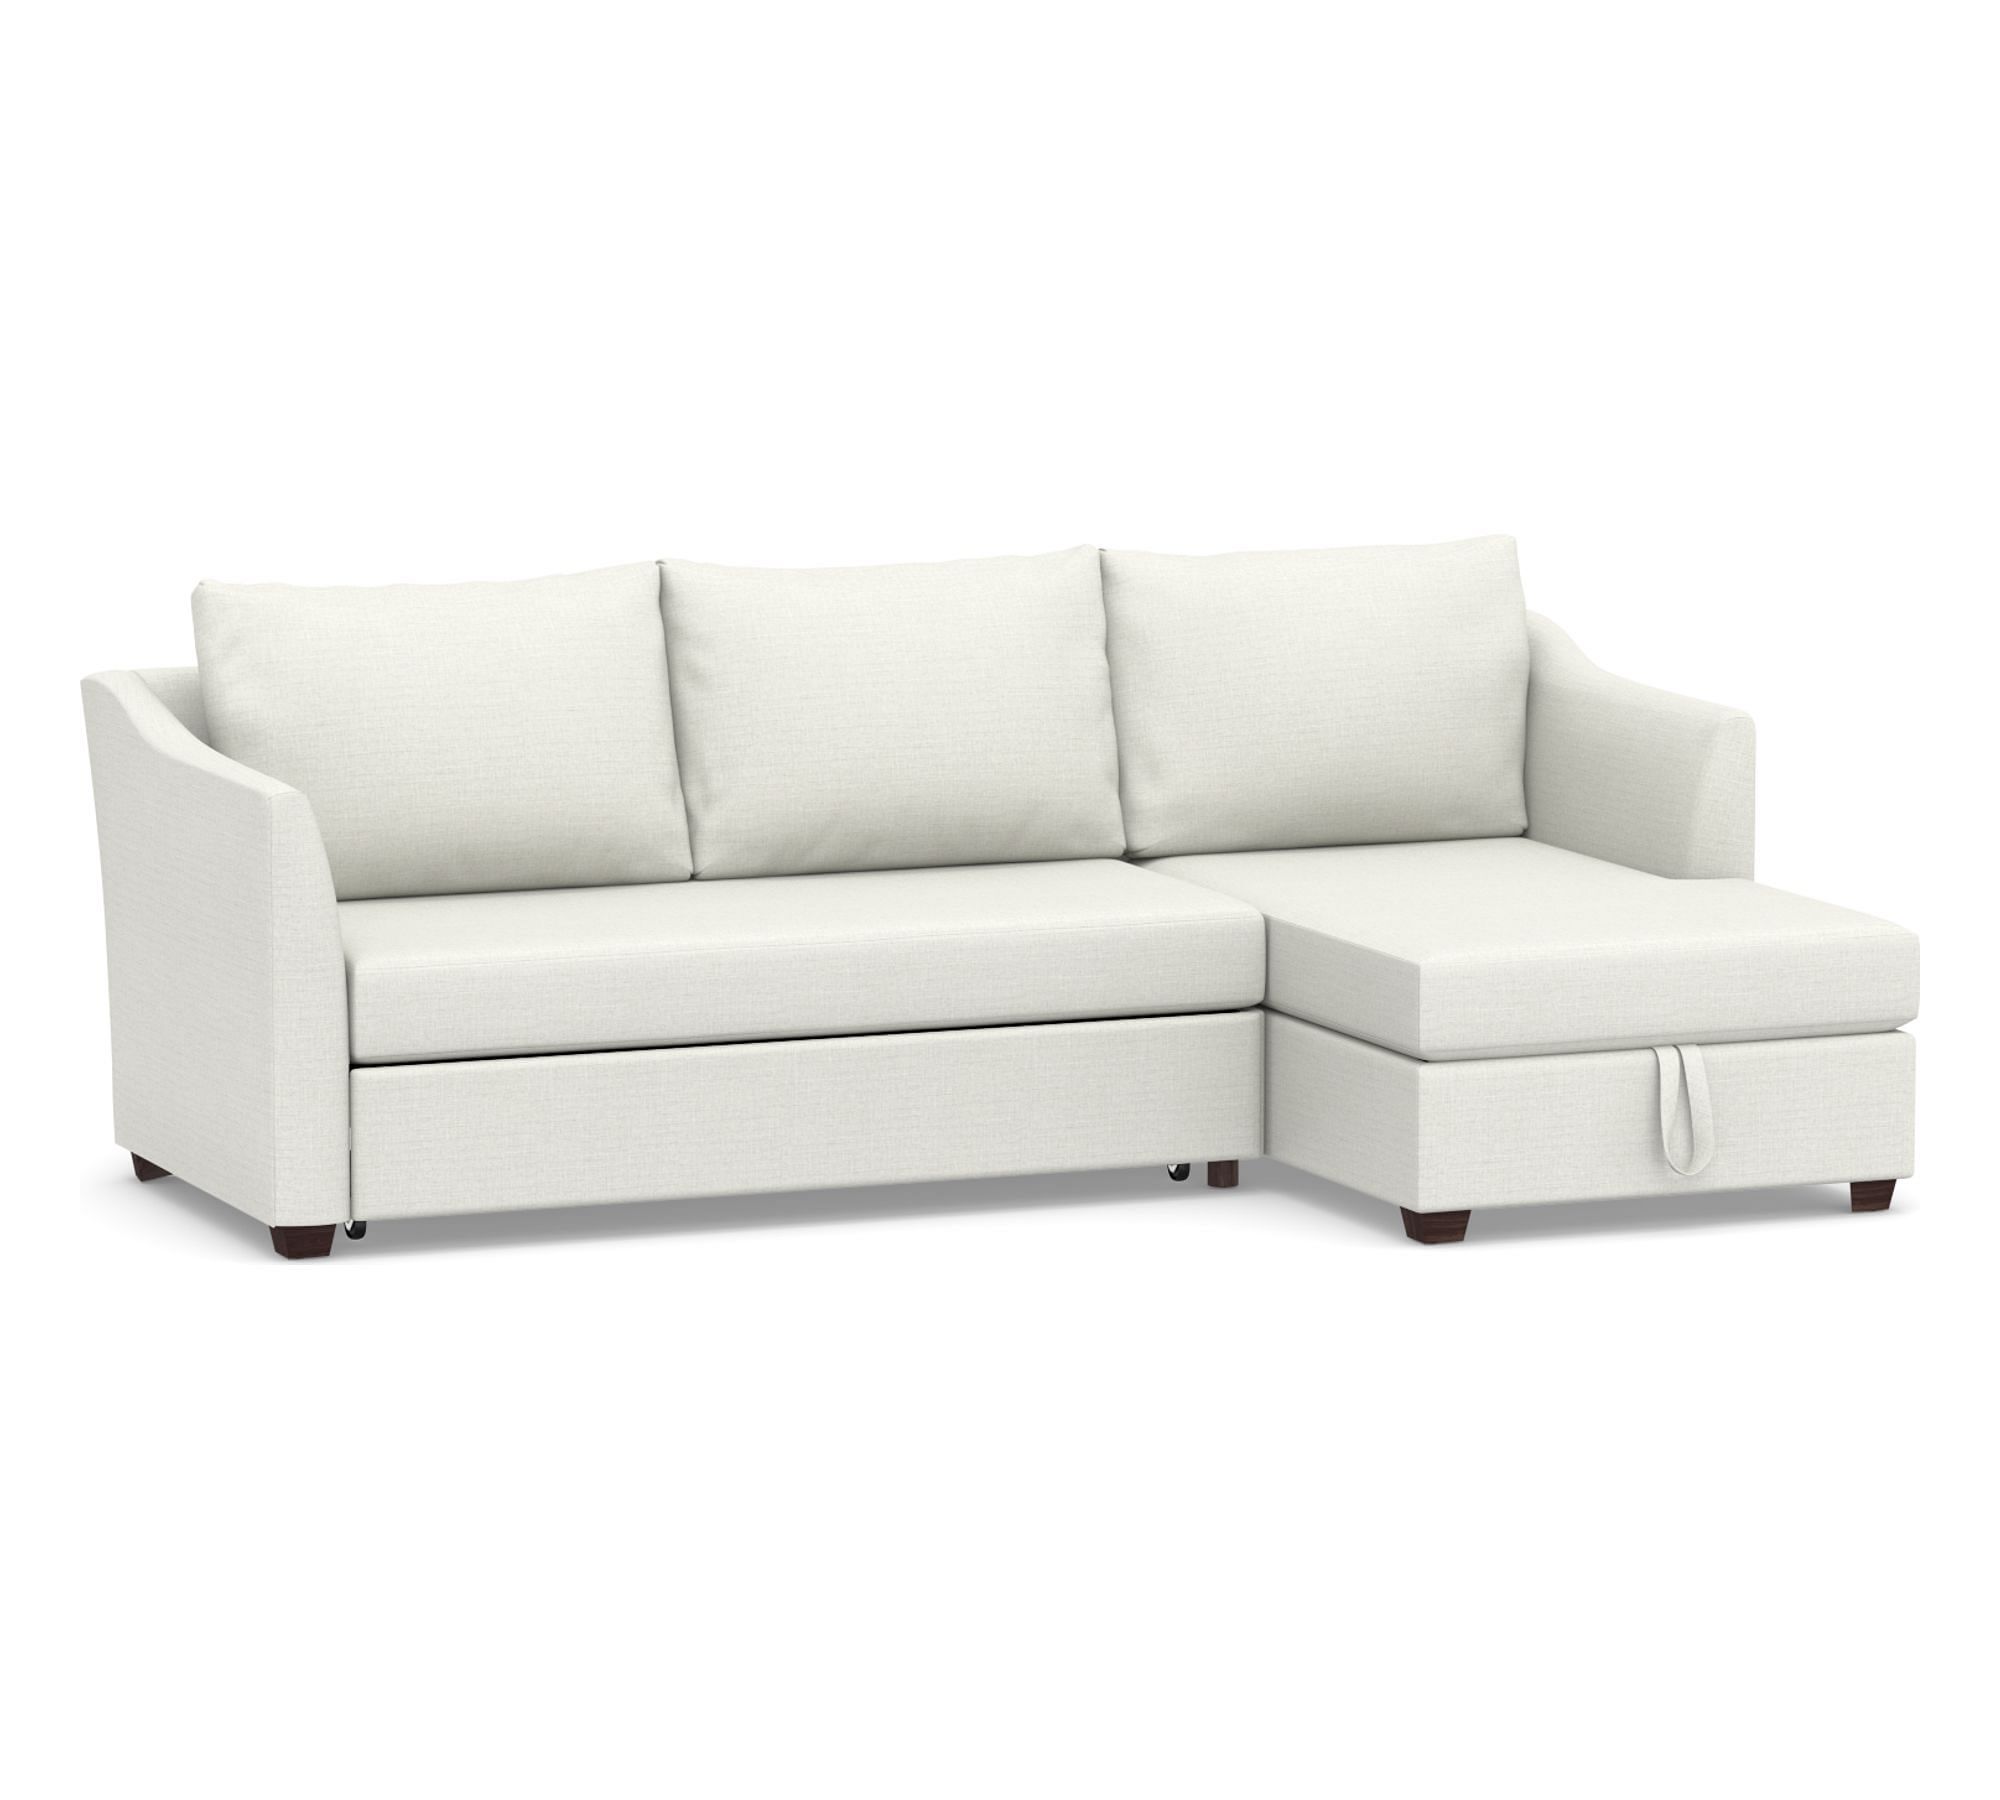 Celeste Trundle Sleeper Chaise Sectional (97")